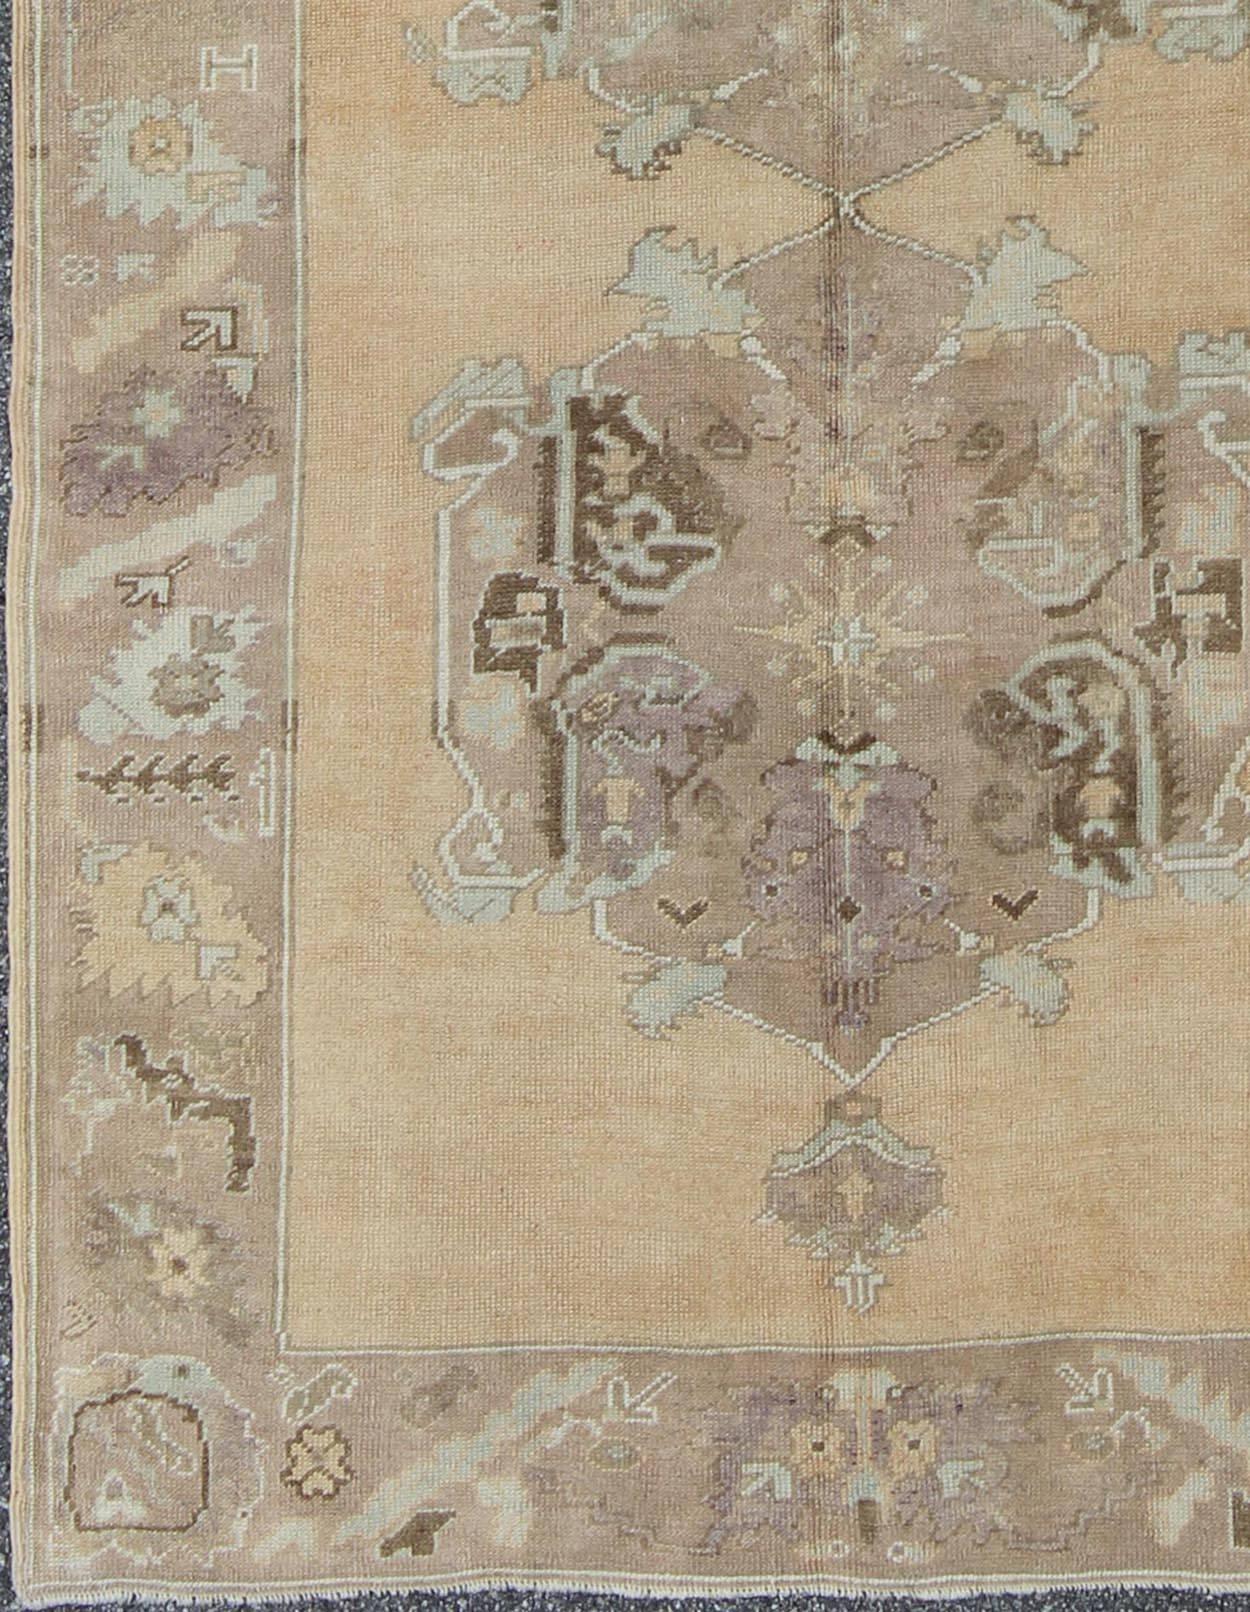 Medallion Oushak Vintage Rug on Sand Colored Field
rug/en-92953,  origin/turkey

This beautiful Oushak features a classic turkish design, . The faint sand-colored ground is home to three elegant taupe, brown and sea foam green medallions. A soft